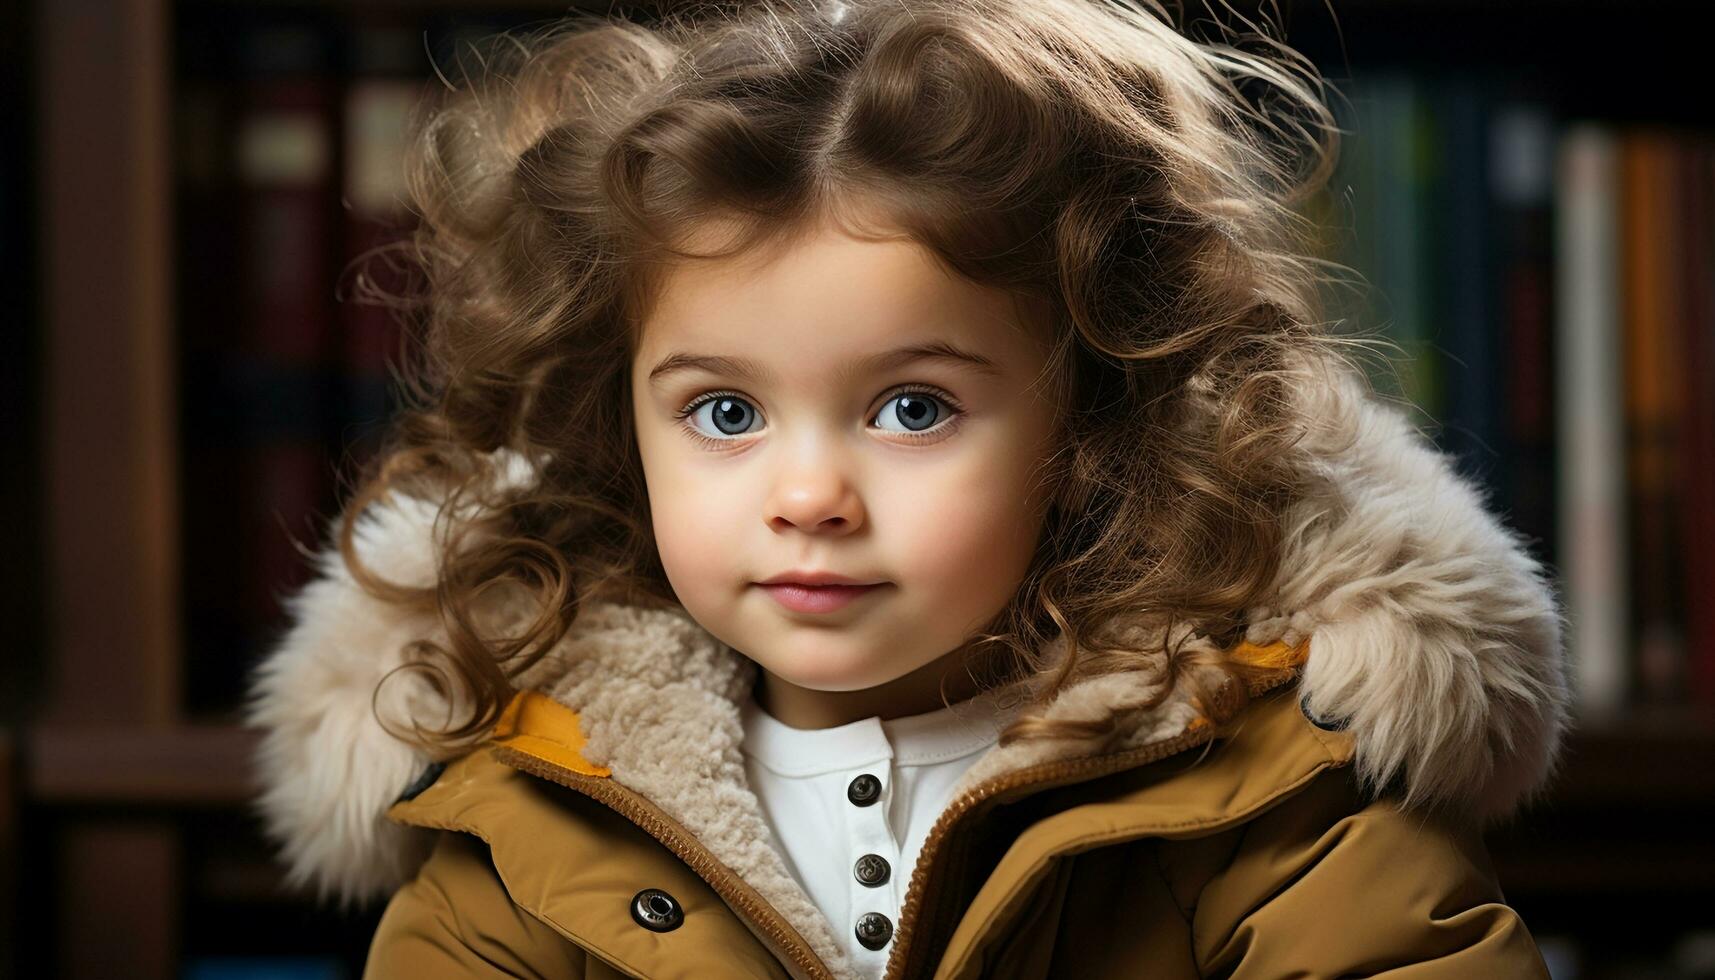 A cute child with curly hair smiling, looking at camera generated by AI photo